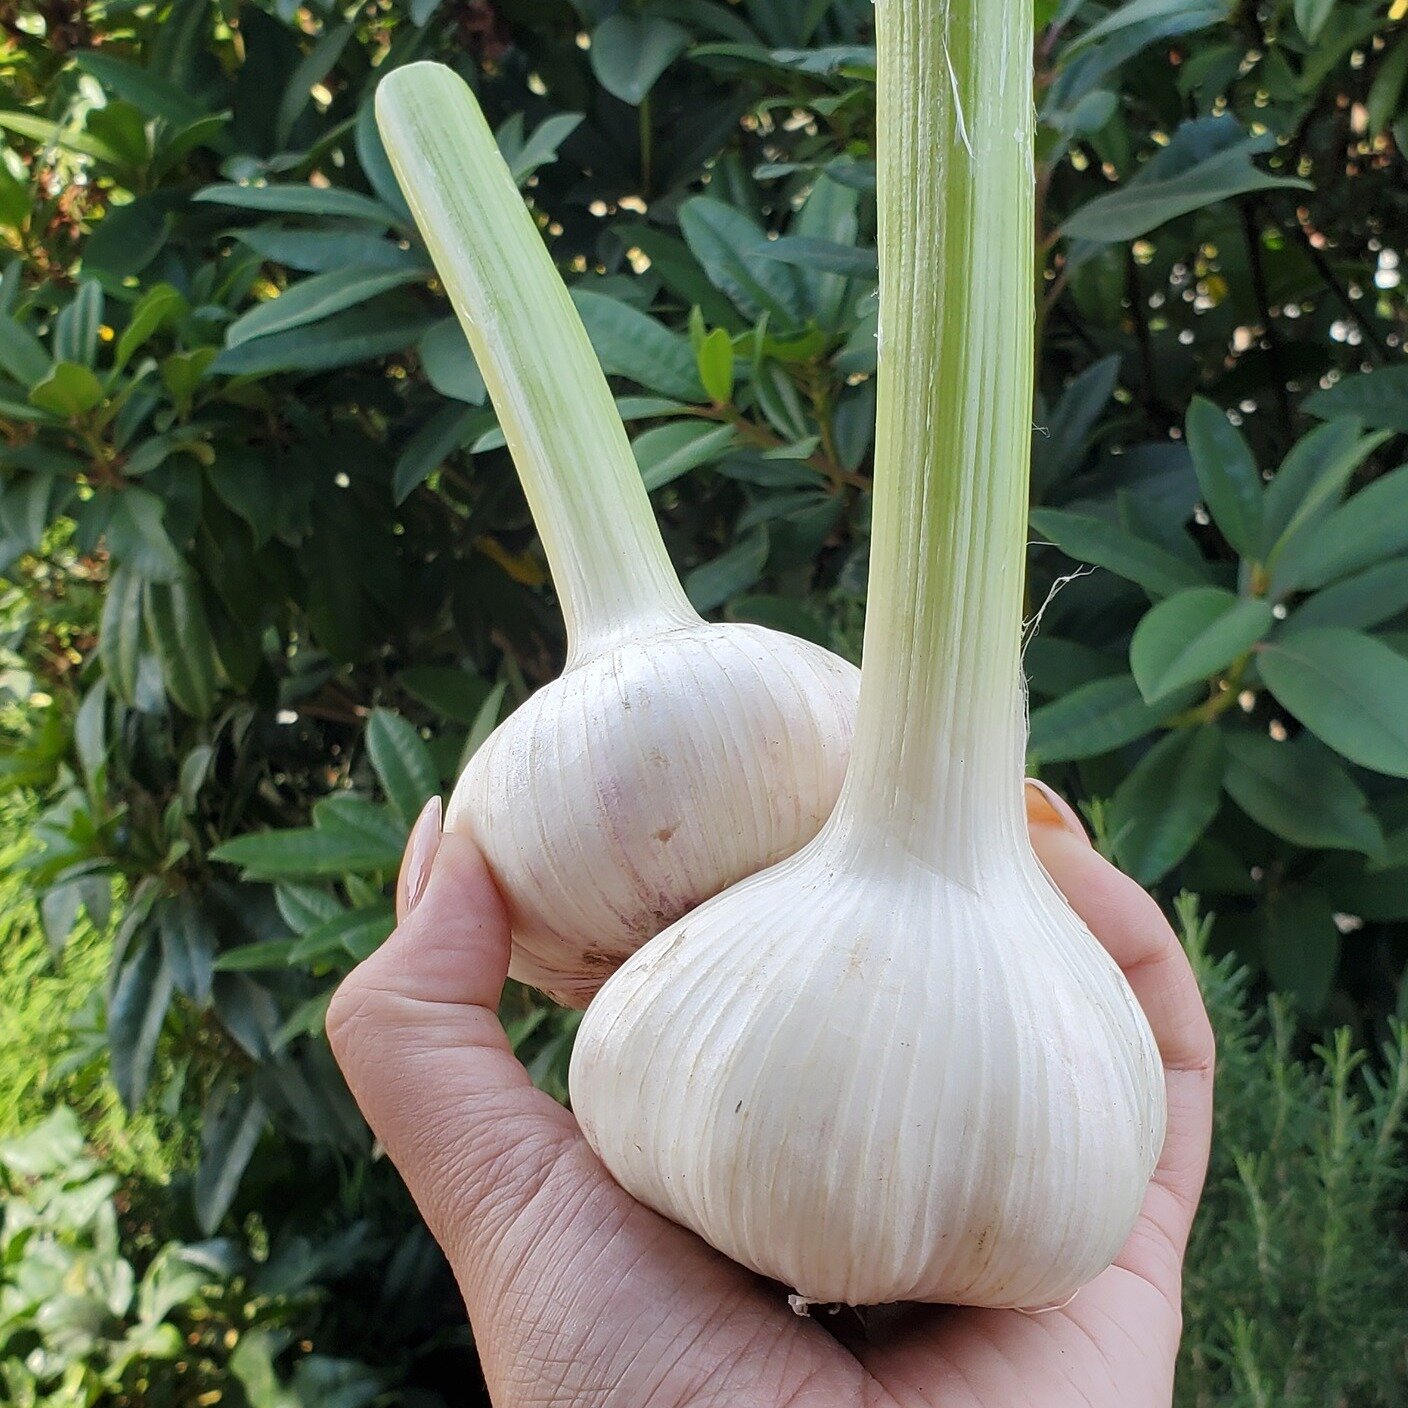 Fresh, summery produce is filling up our market this week!! 😍  We are open 10-6, Thurs &amp; Fri and 10-5, Sat &amp; Sun.
 
🧄Look at this massive garlic from Cousin Andrew down in Saanich! Freshly harvested - these bulbs are beautiful!
 
💚We have 